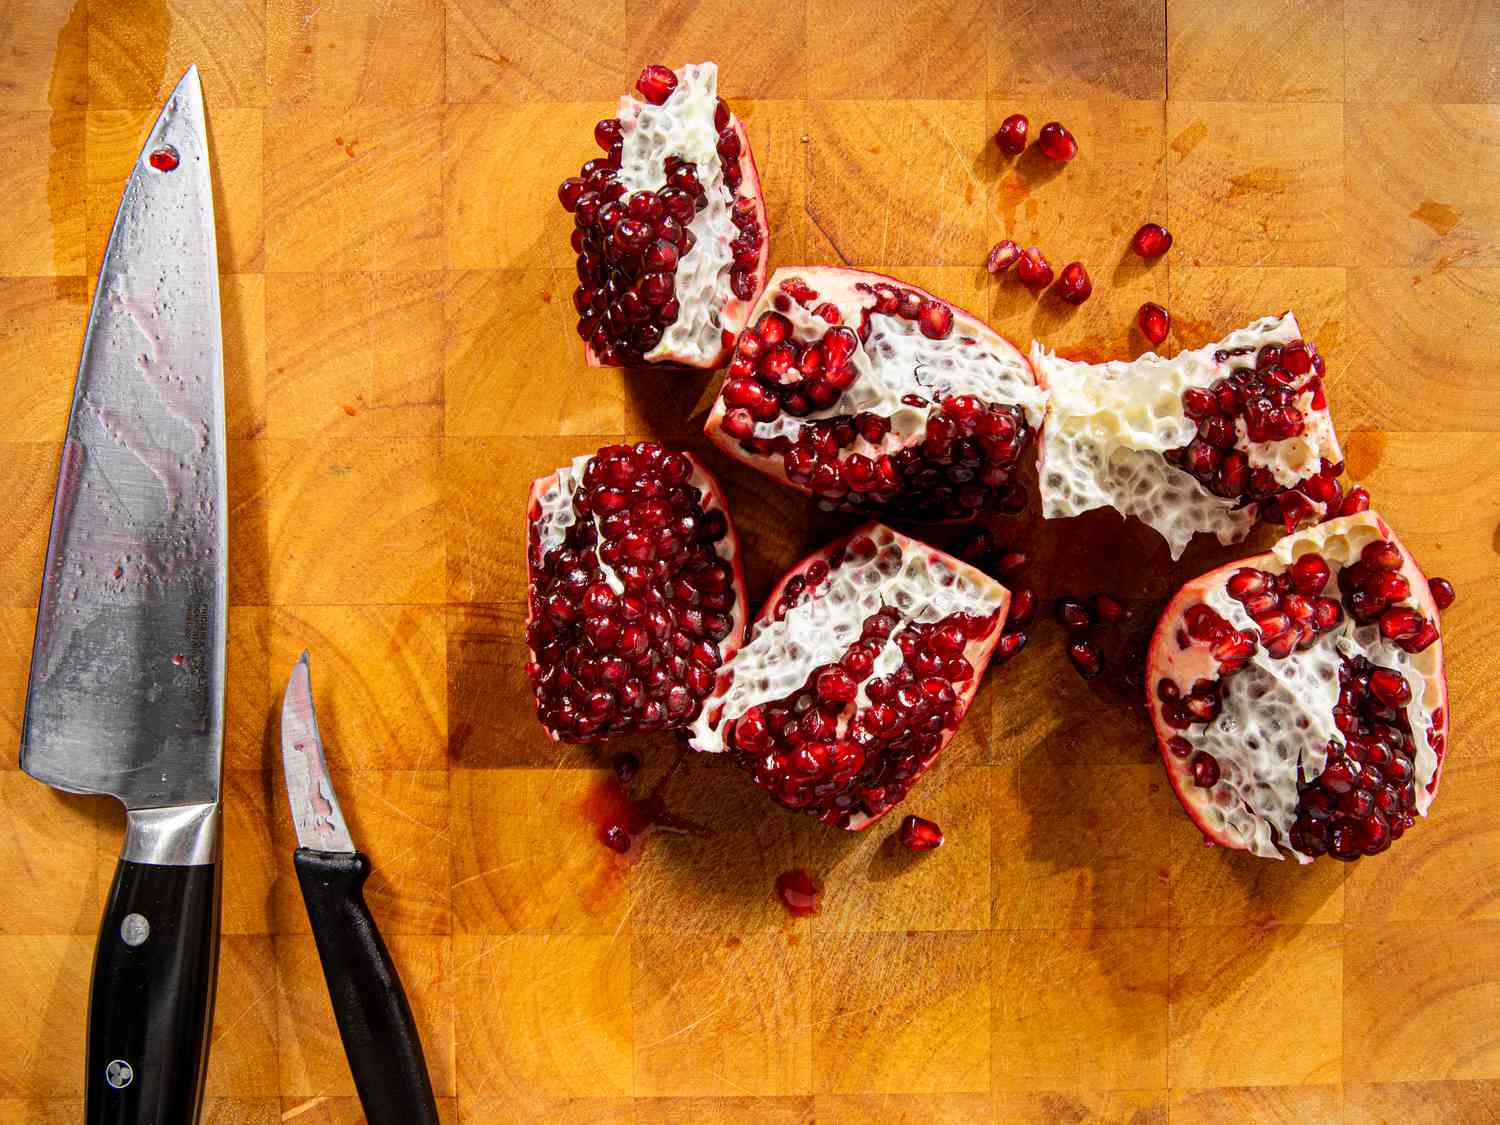 Overhead view of pomegranate in pieces on a cutting board